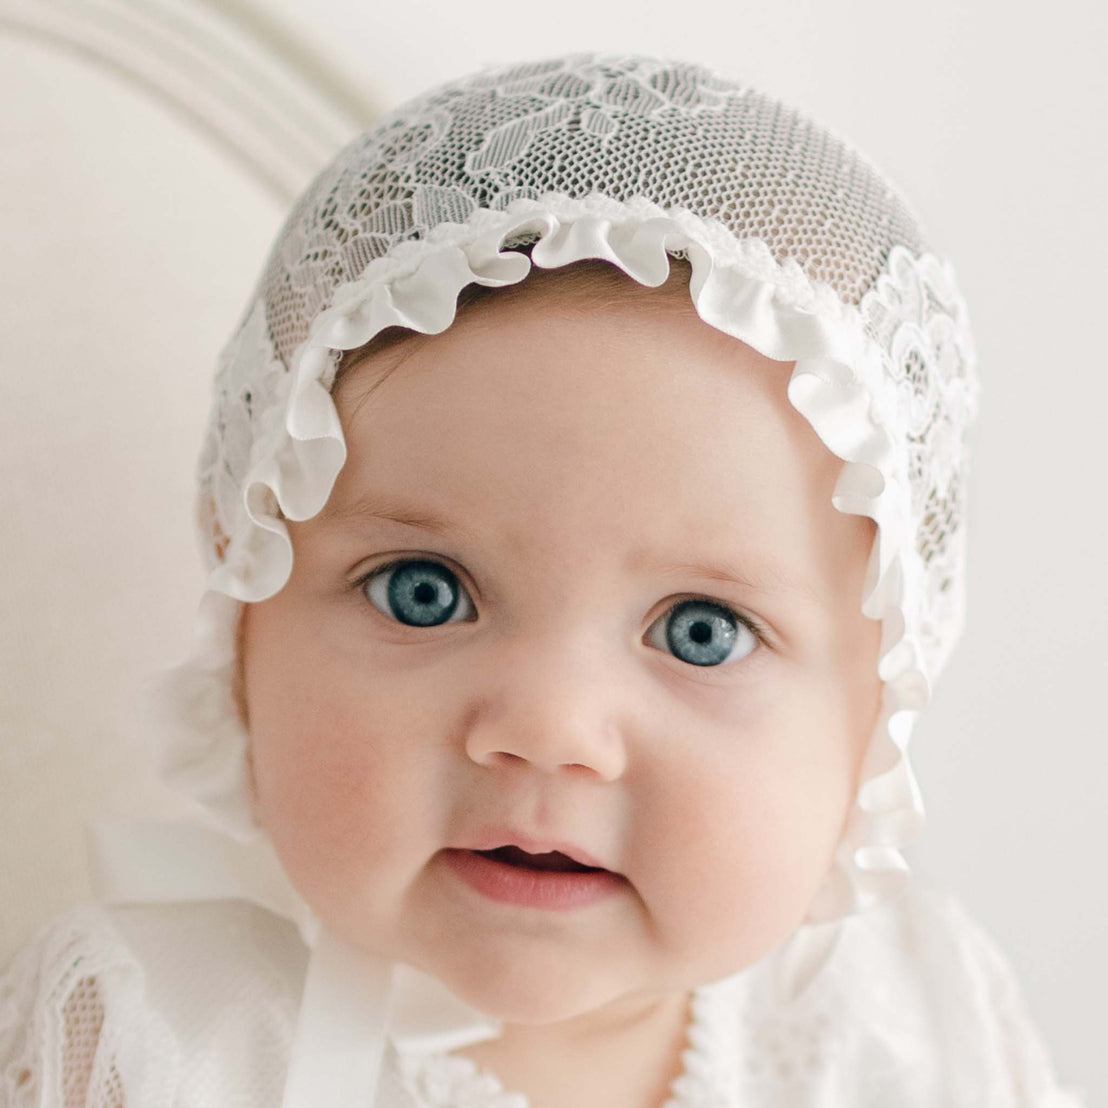 A close-up of a baby with blue eyes wearing a Victoria Lace Bonnet adorned with ivory floral lace and an ivory silk ribbon. The baby is looking directly at the camera with a neutral expression, while the soft, light background complements the baby's light-colored attire.